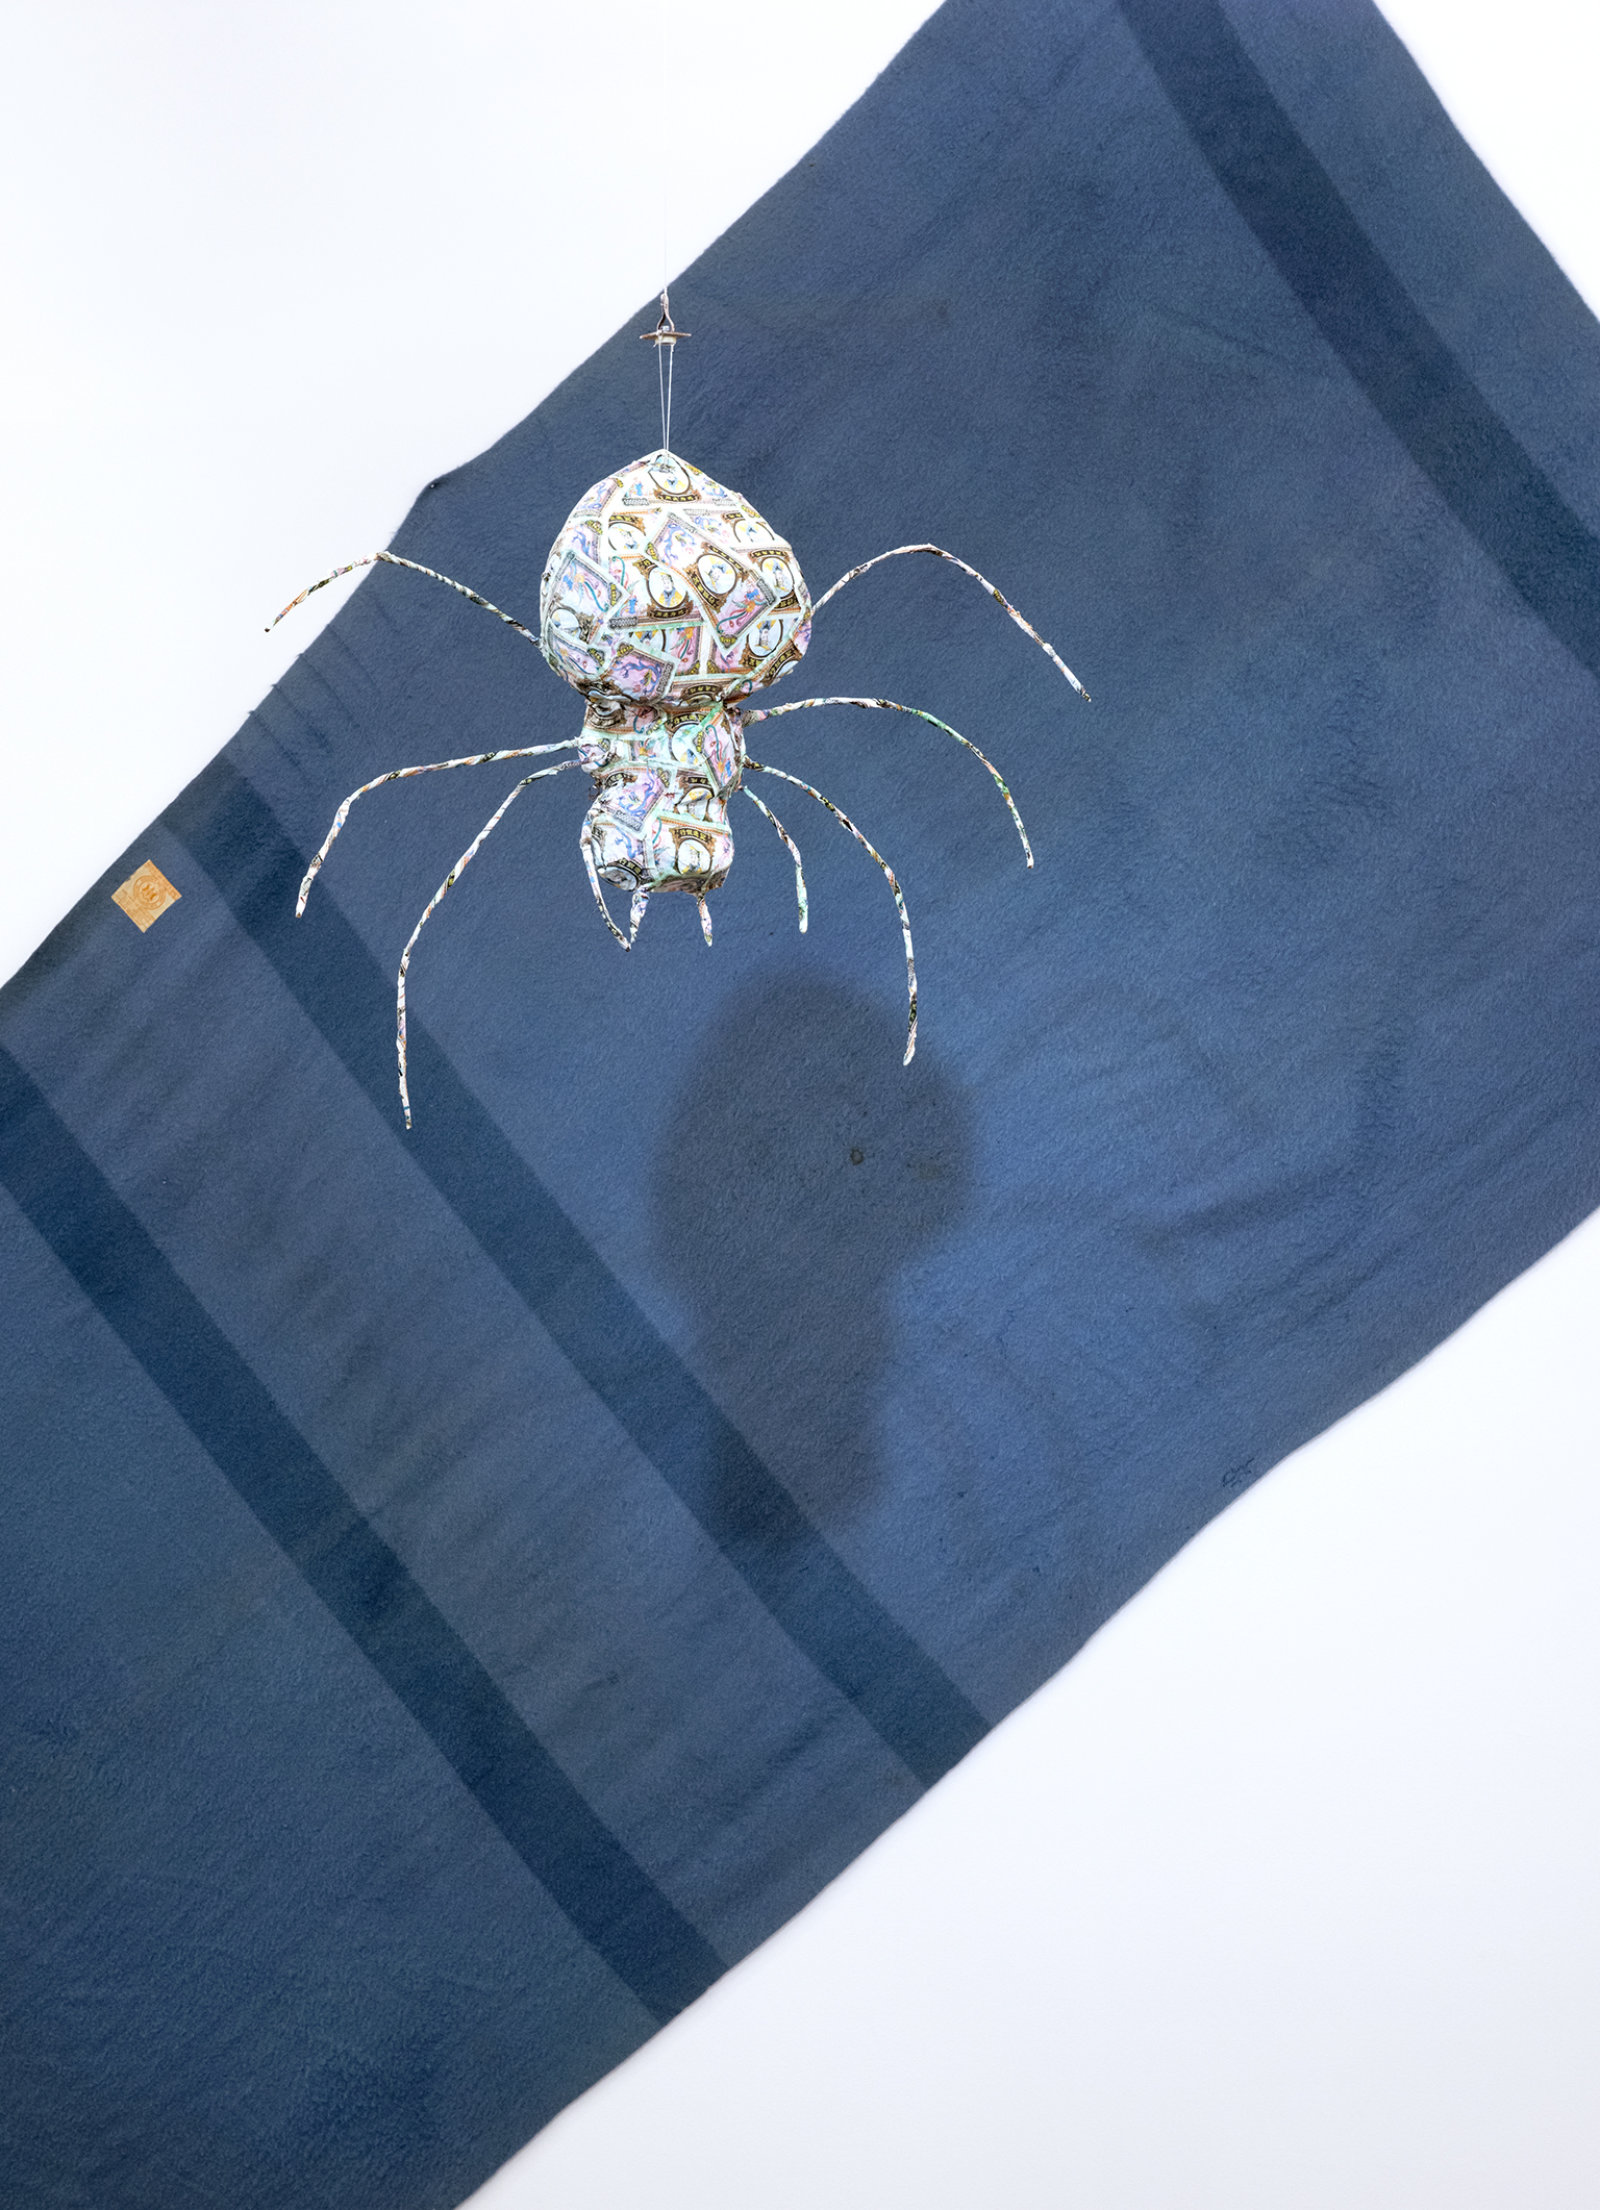 Jerry Pethick, Bigger than a book, Wilder than a Tree (detail), 1994–1997, found book Irish Giant, paint, graphite on linen, styrofoam, cibachrome photograph, wool blanket, spotlight, papier-mâché, metal spider, dimensions variable